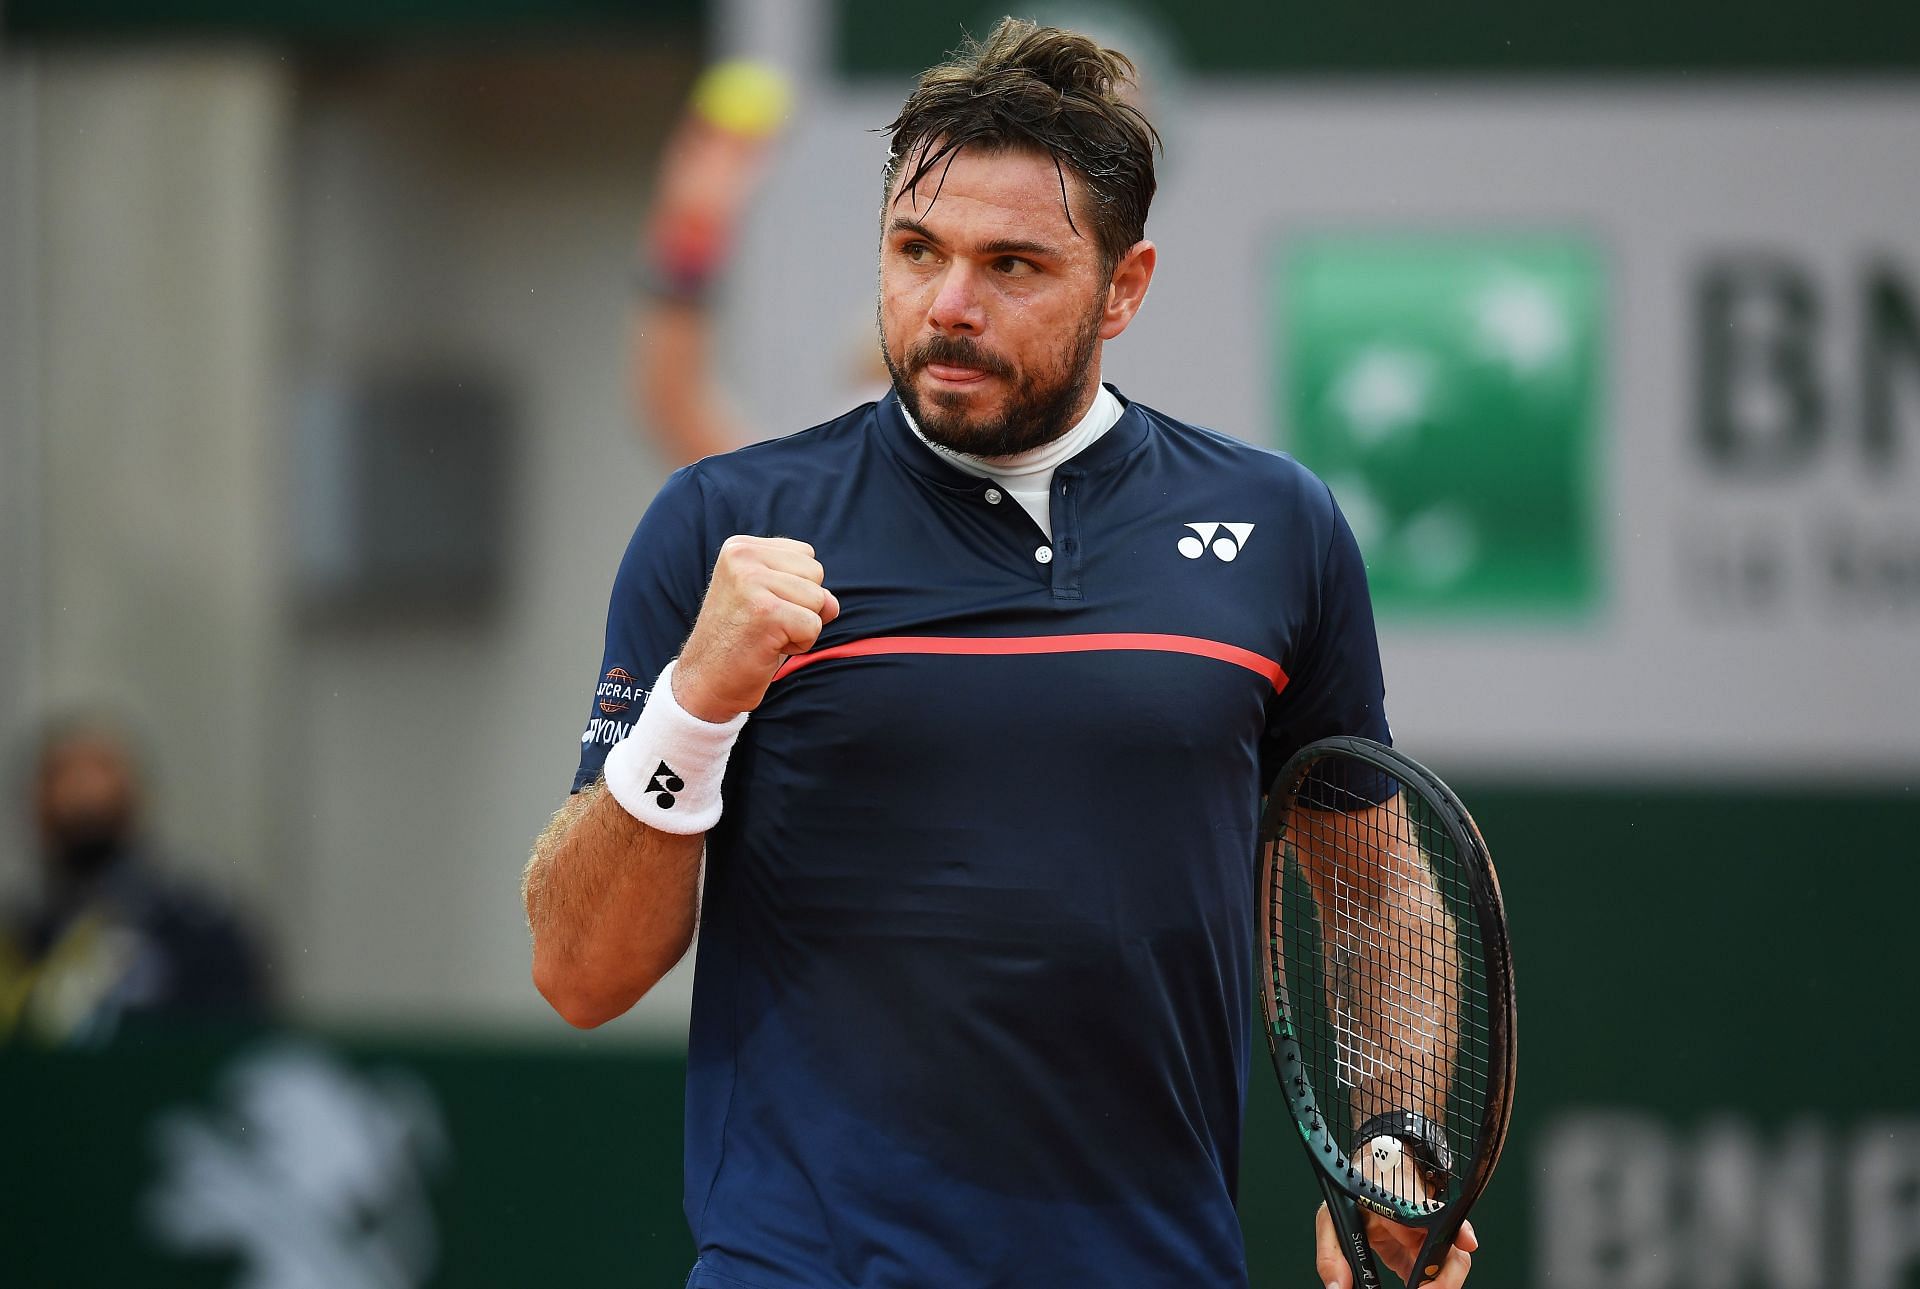 Stan Wawrinka in action at the 2020 French Open